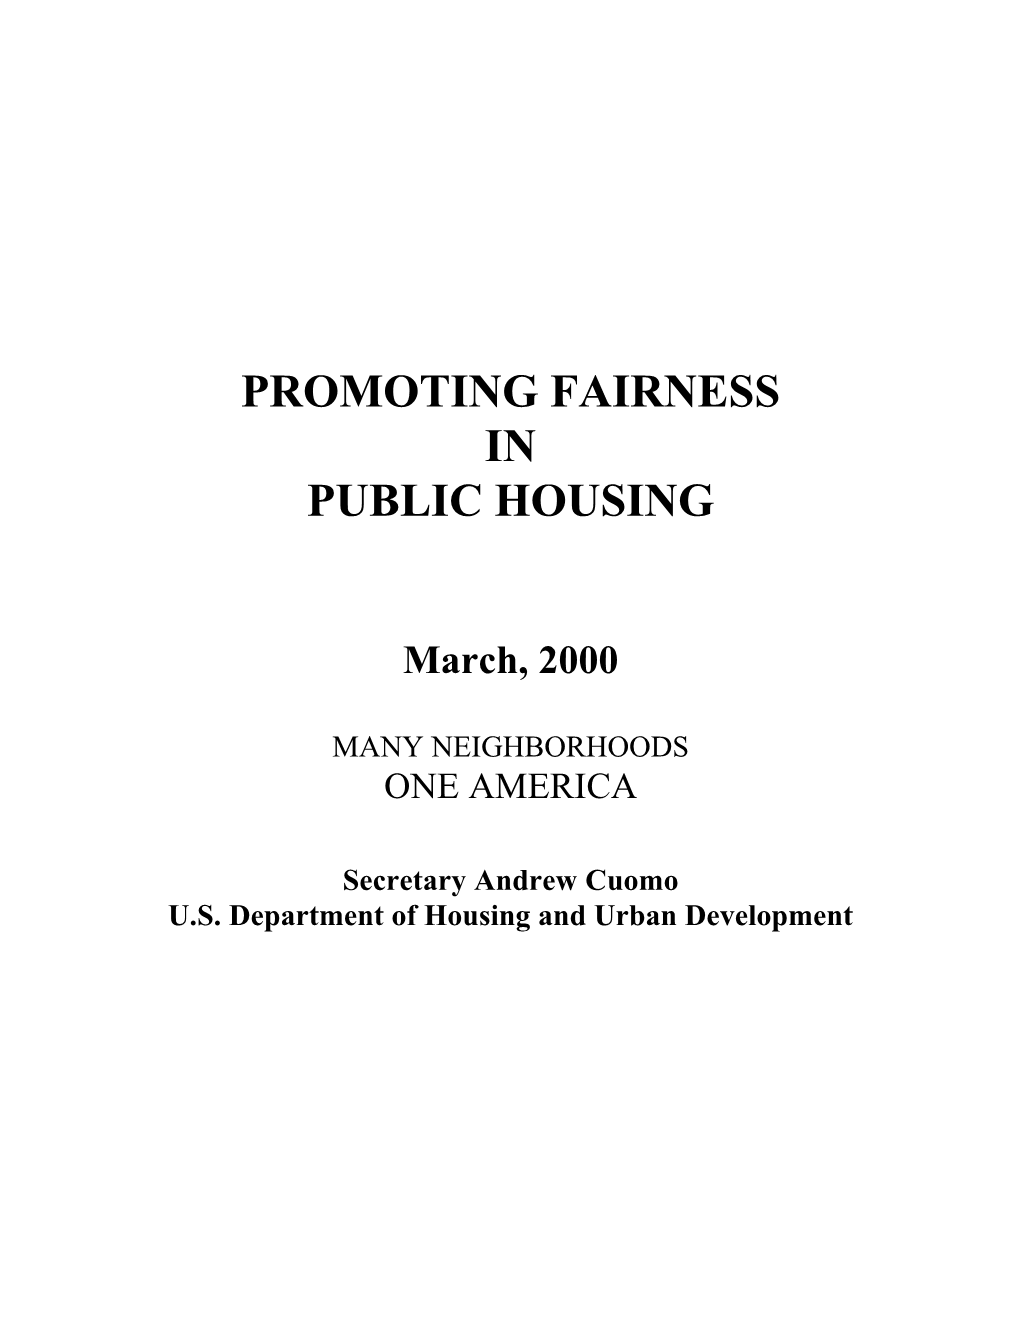 NOTE – QUESTION – Are We Using Public Housing